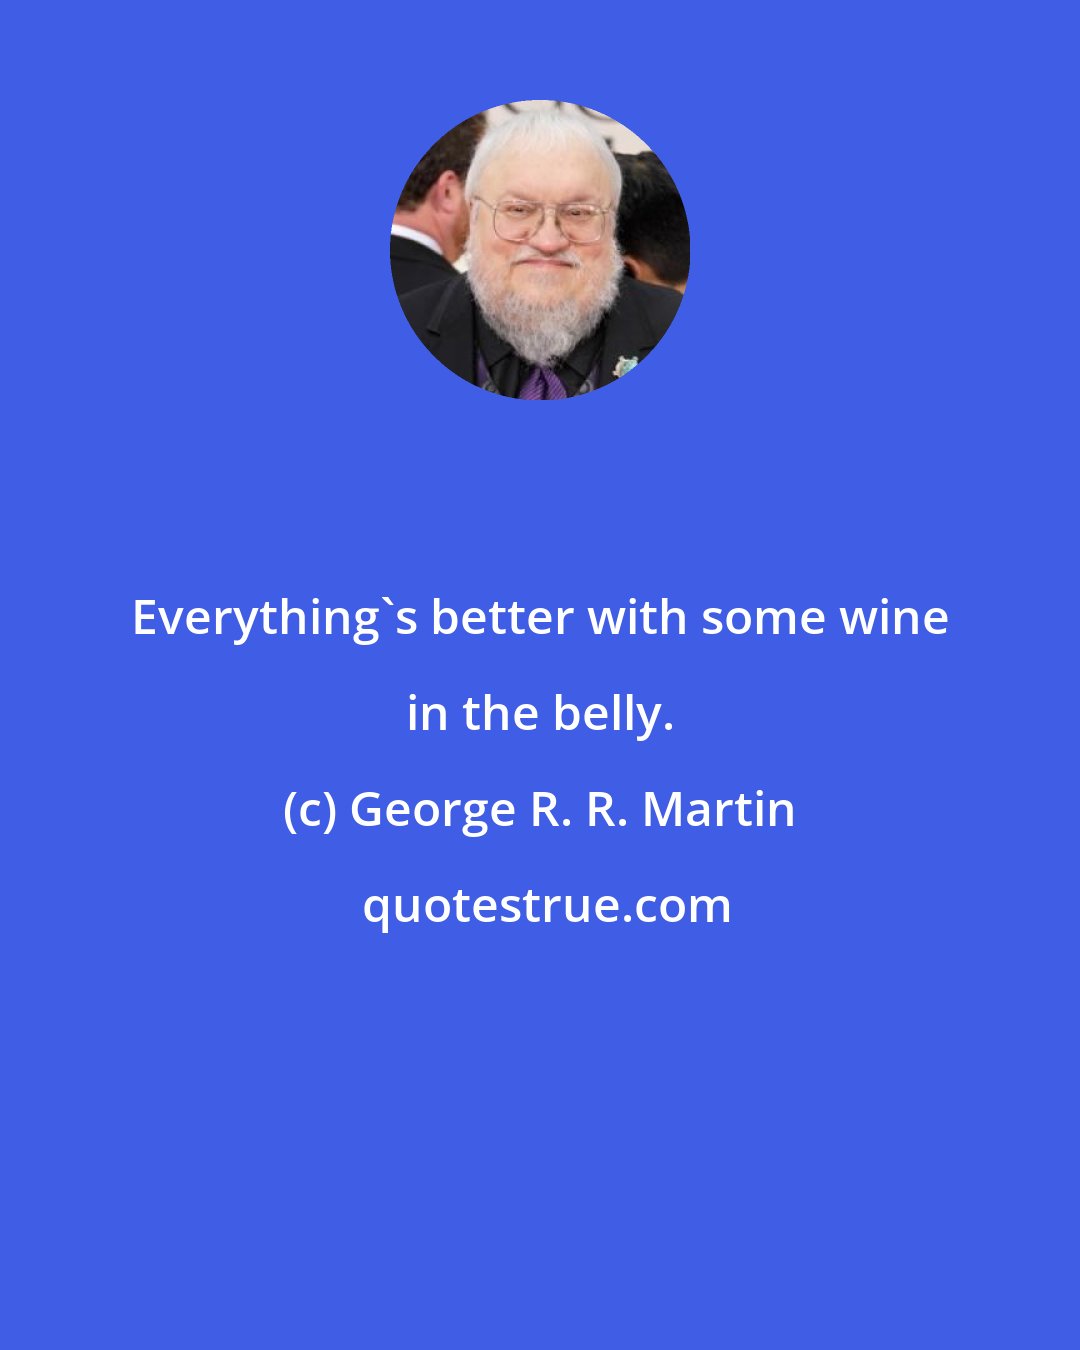 George R. R. Martin: Everything's better with some wine in the belly.